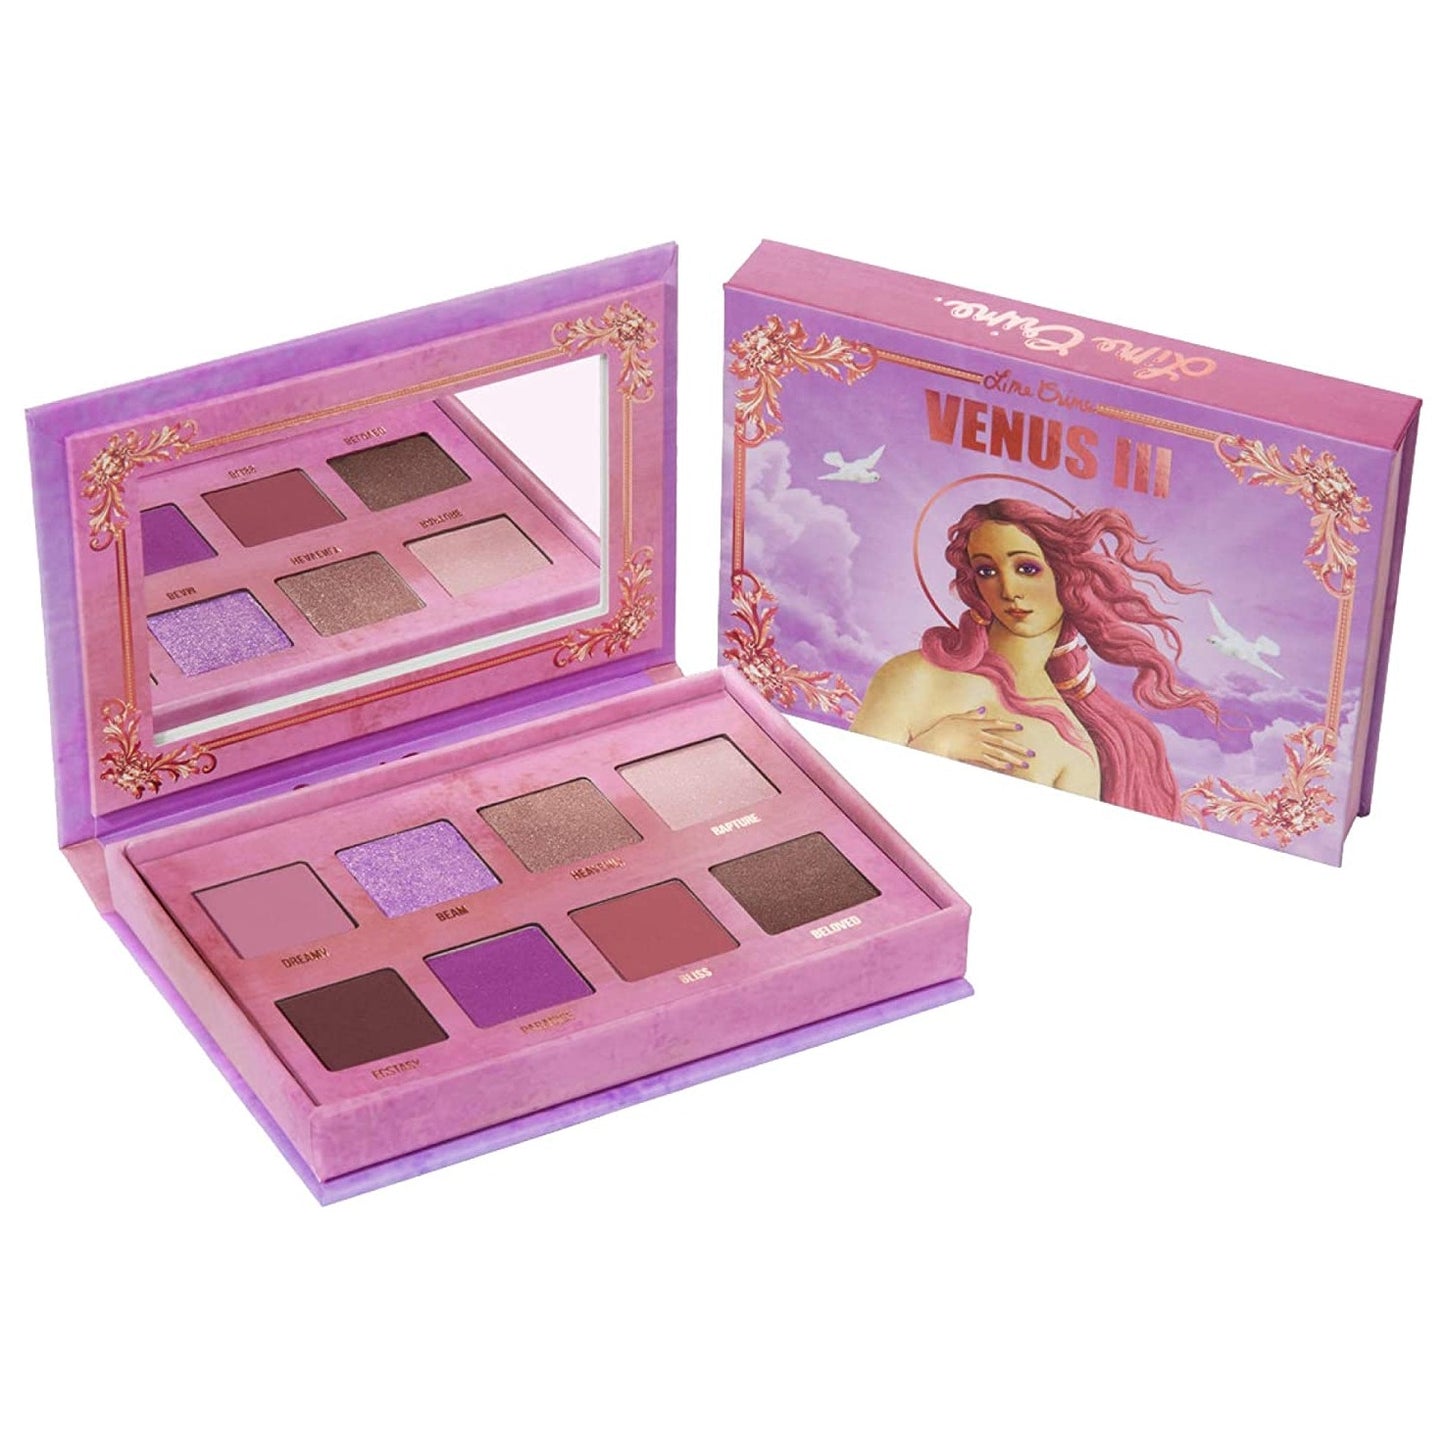 The Pretty Grunge Shadow Palette   The heavenly sister of the grunge shadow palette! Happy pops of purple and pink put the crowning touch on the perfect light-to-mid tone range to flatter all skin tones. This palette includes 8 shades, 5 different finishes, 1 swipe coverage designed for eyes, cheek, and face.  • Grunge gets pretty for the latest Venus palette, featuring shades and finishes that beam all the way to the skies beyond.  • Rapturous lilac rose gold and mauve shades mixed with earthly browns